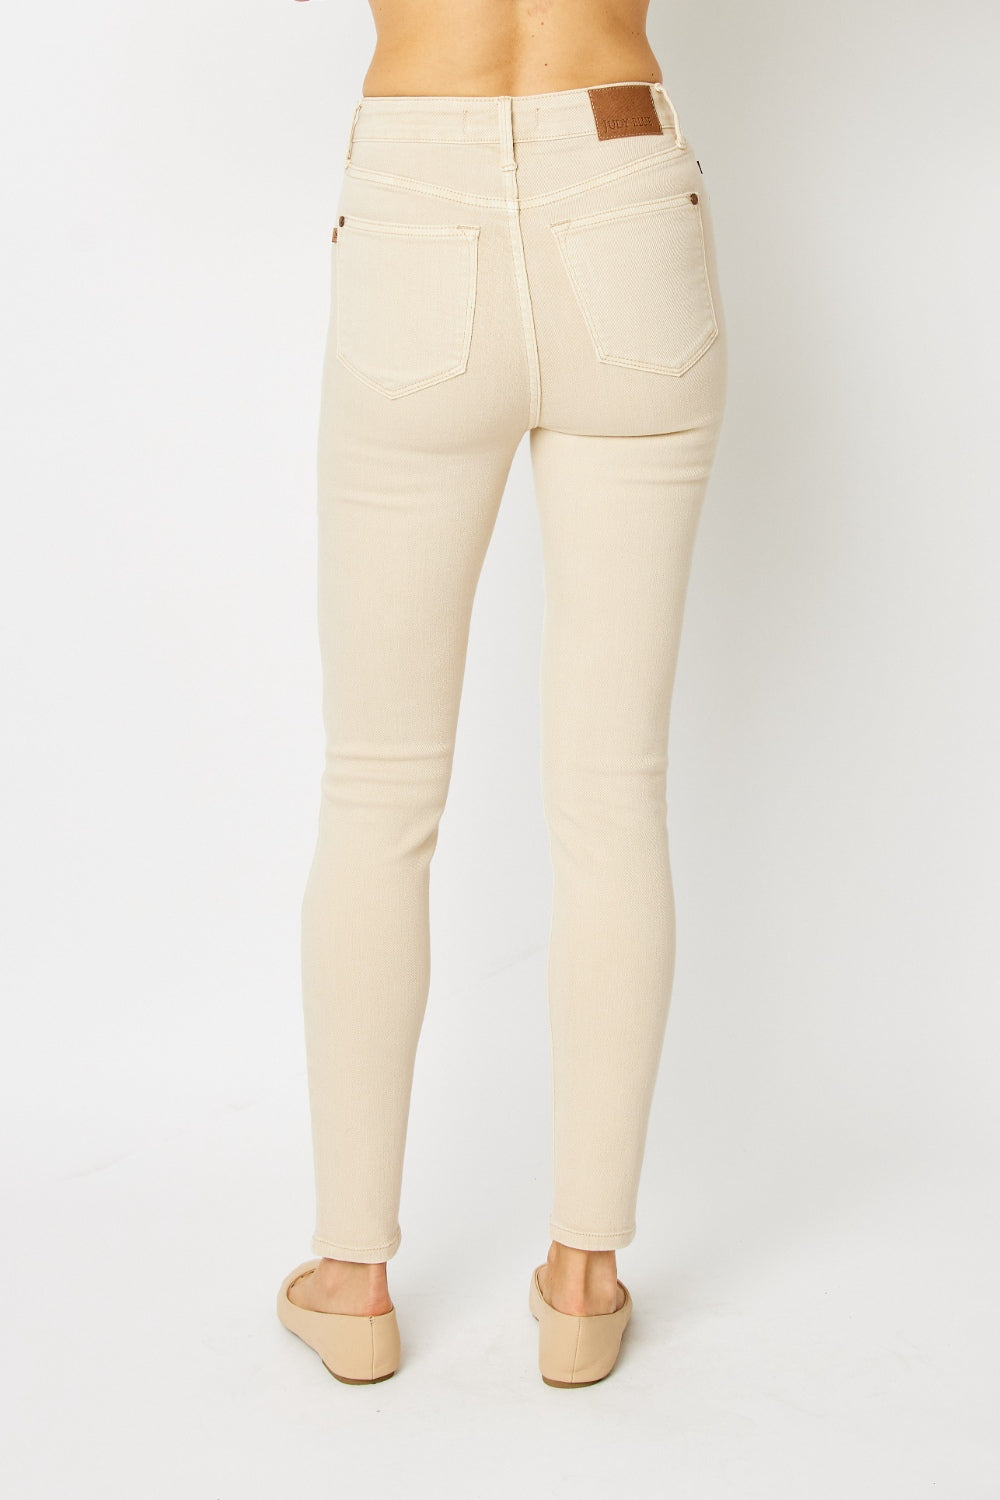 ONLINE ONLY! Judy Blue Full Size Garment Dyed Tummy Control Skinny Jeans